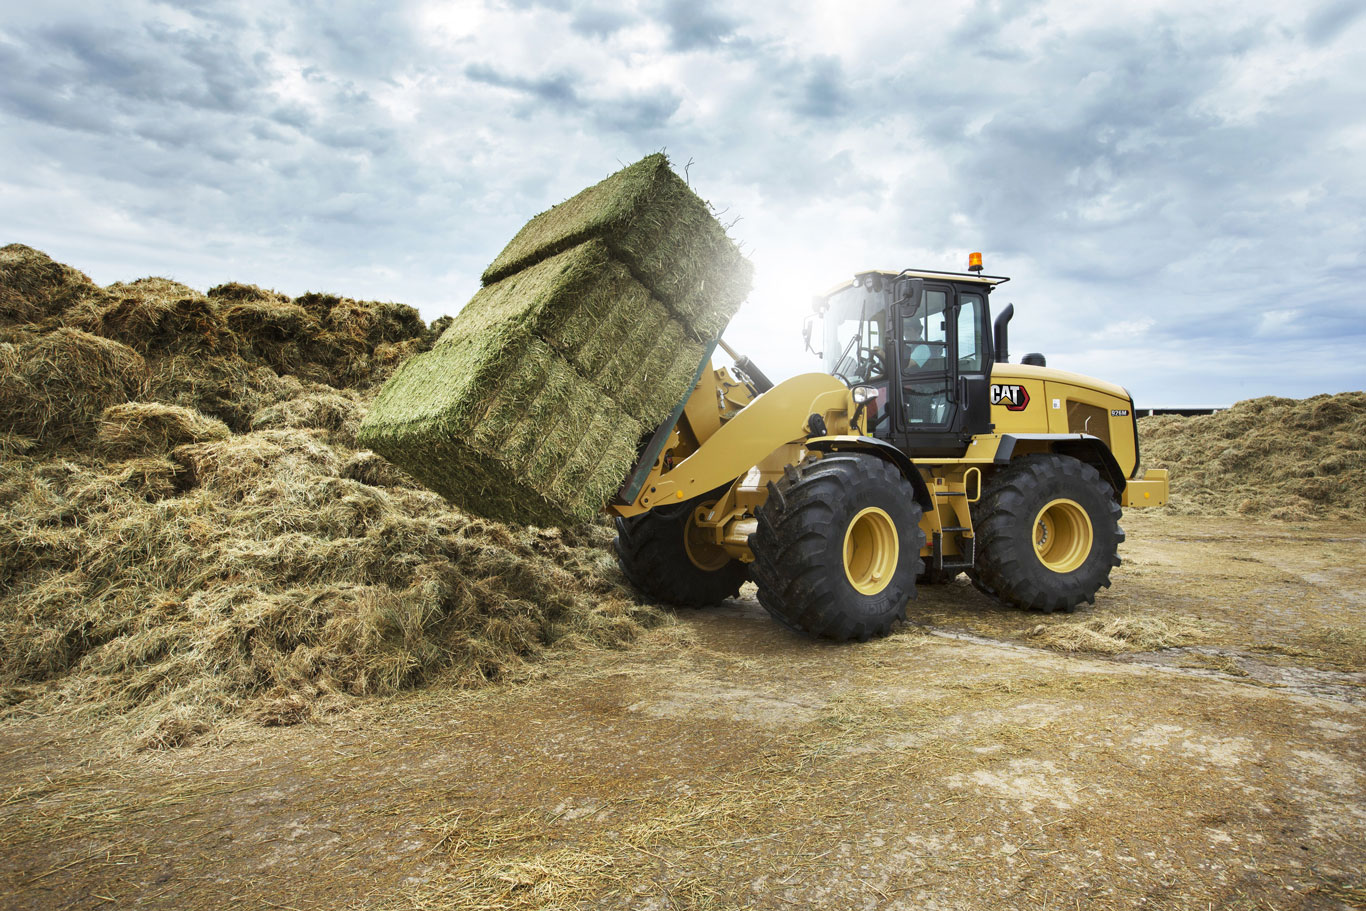 Cat AG tractor lifting hay bale